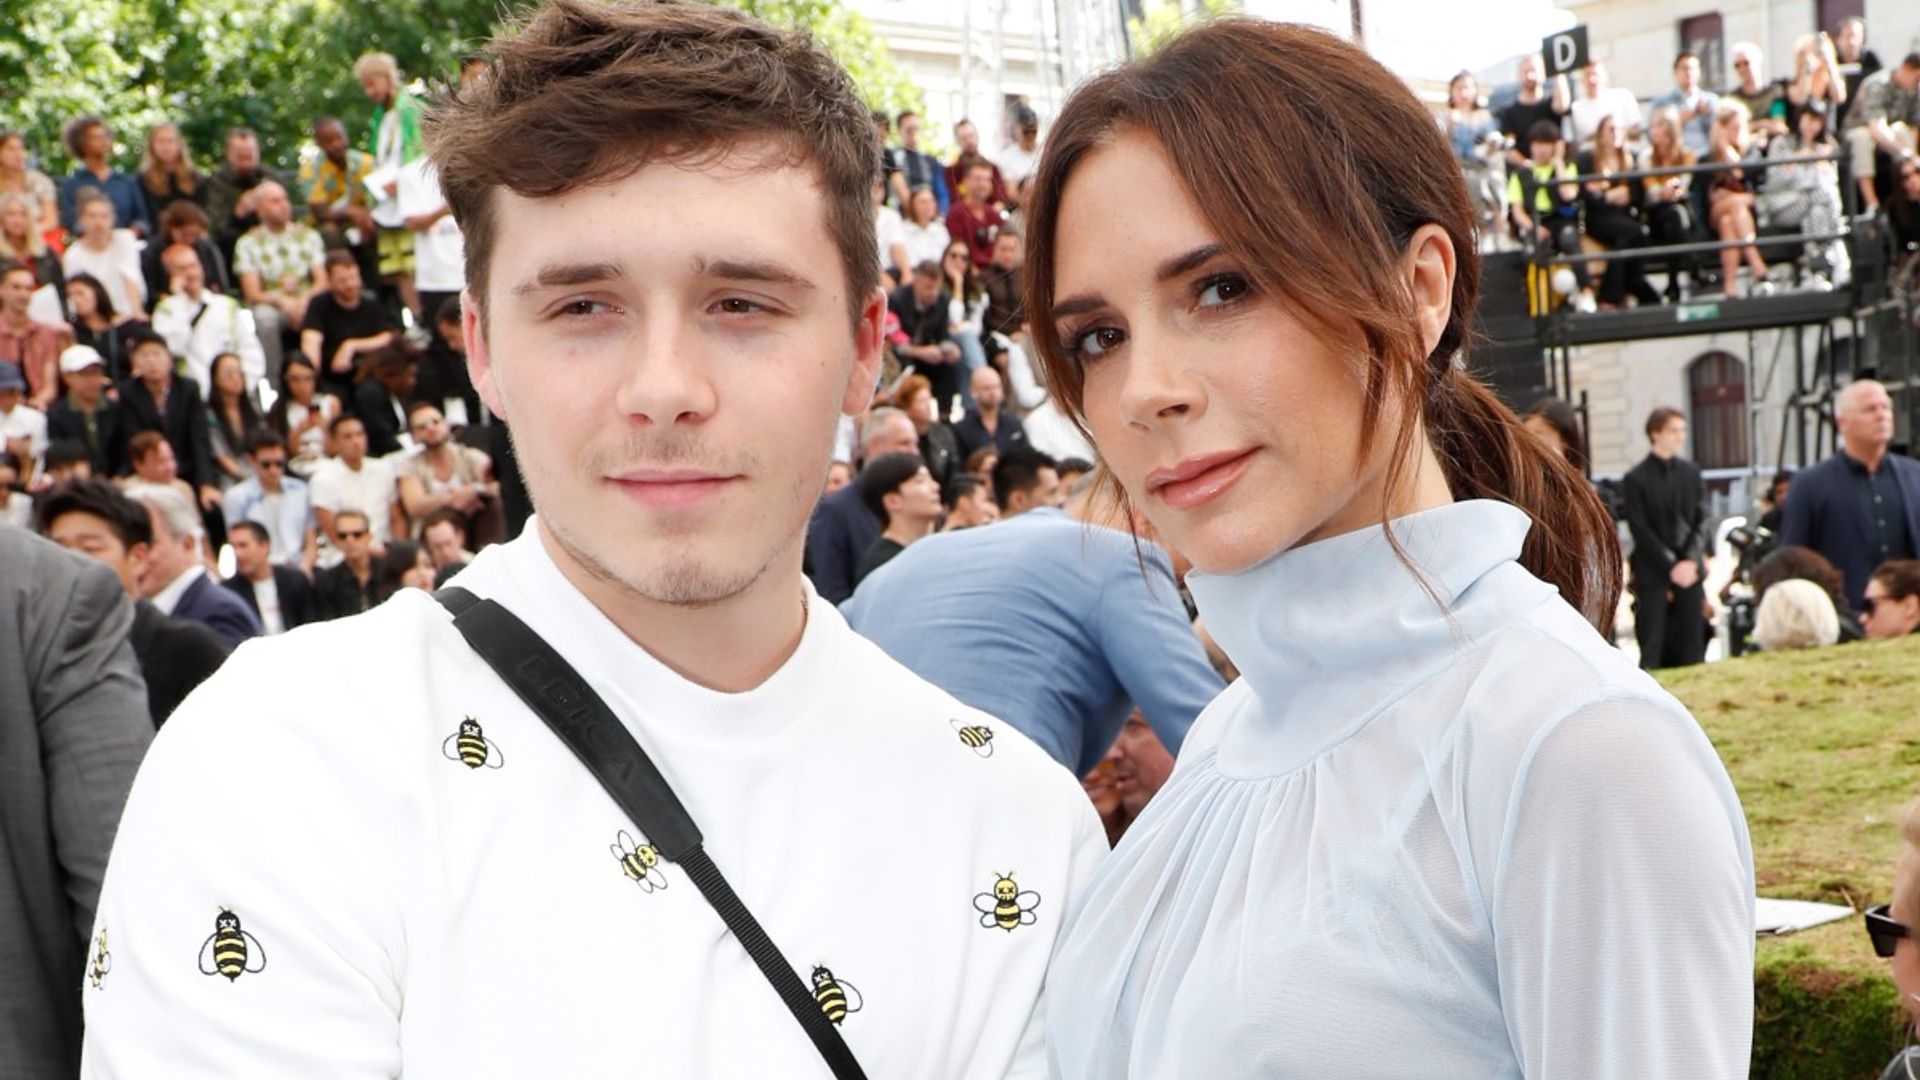 Why Brooklyn Beckham was missing from Victoria Beckham’s fashion show